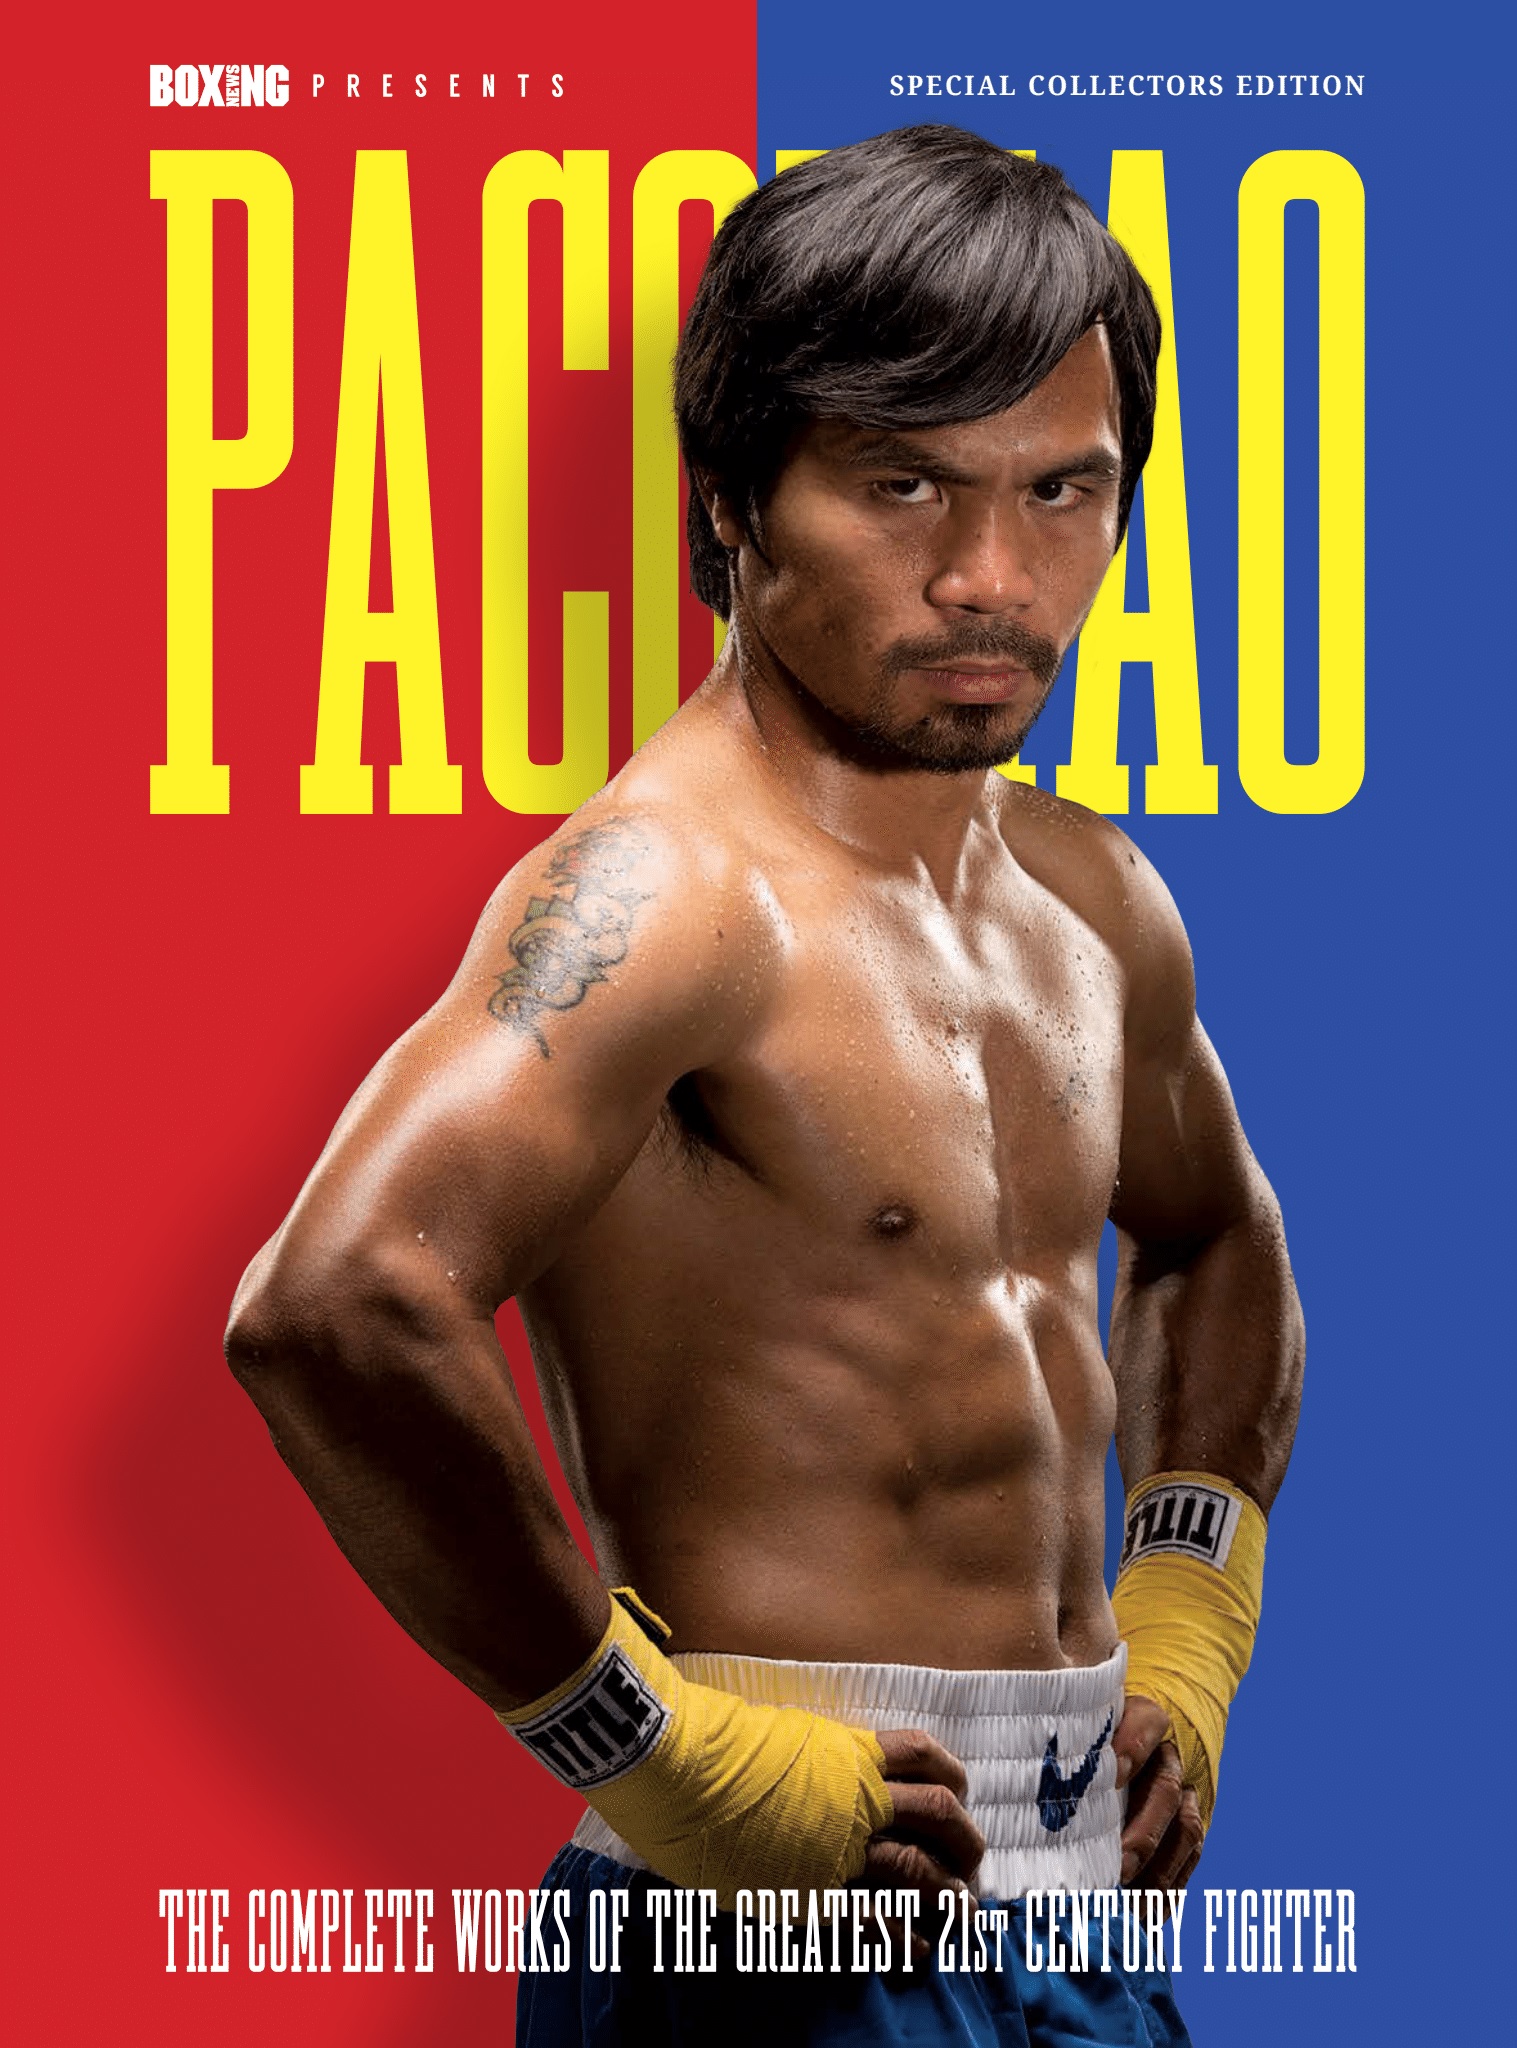 Boxing News Presents<br>Issue 6 - Manny Pacquiao